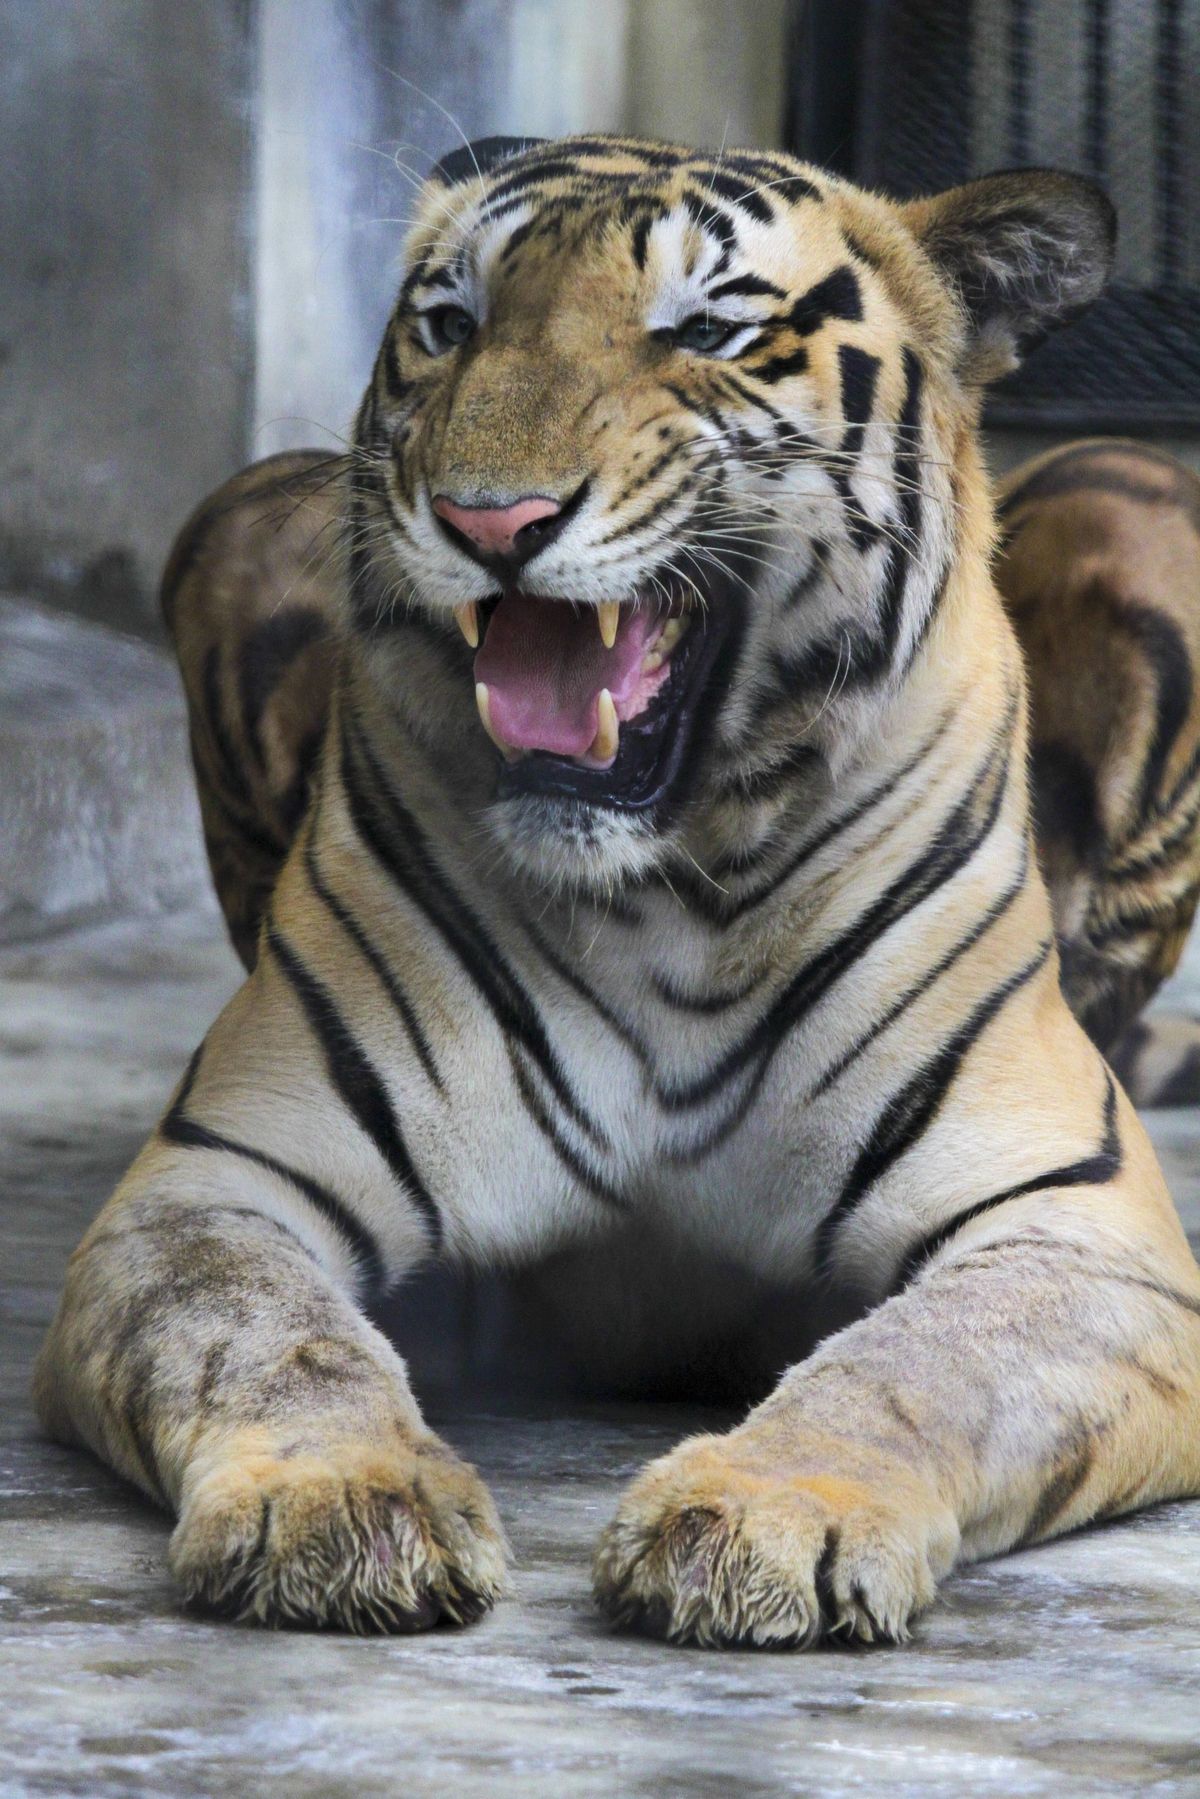 Man Faces up to 5 Years in Prison for Illegally Catching and Importing a Tiger